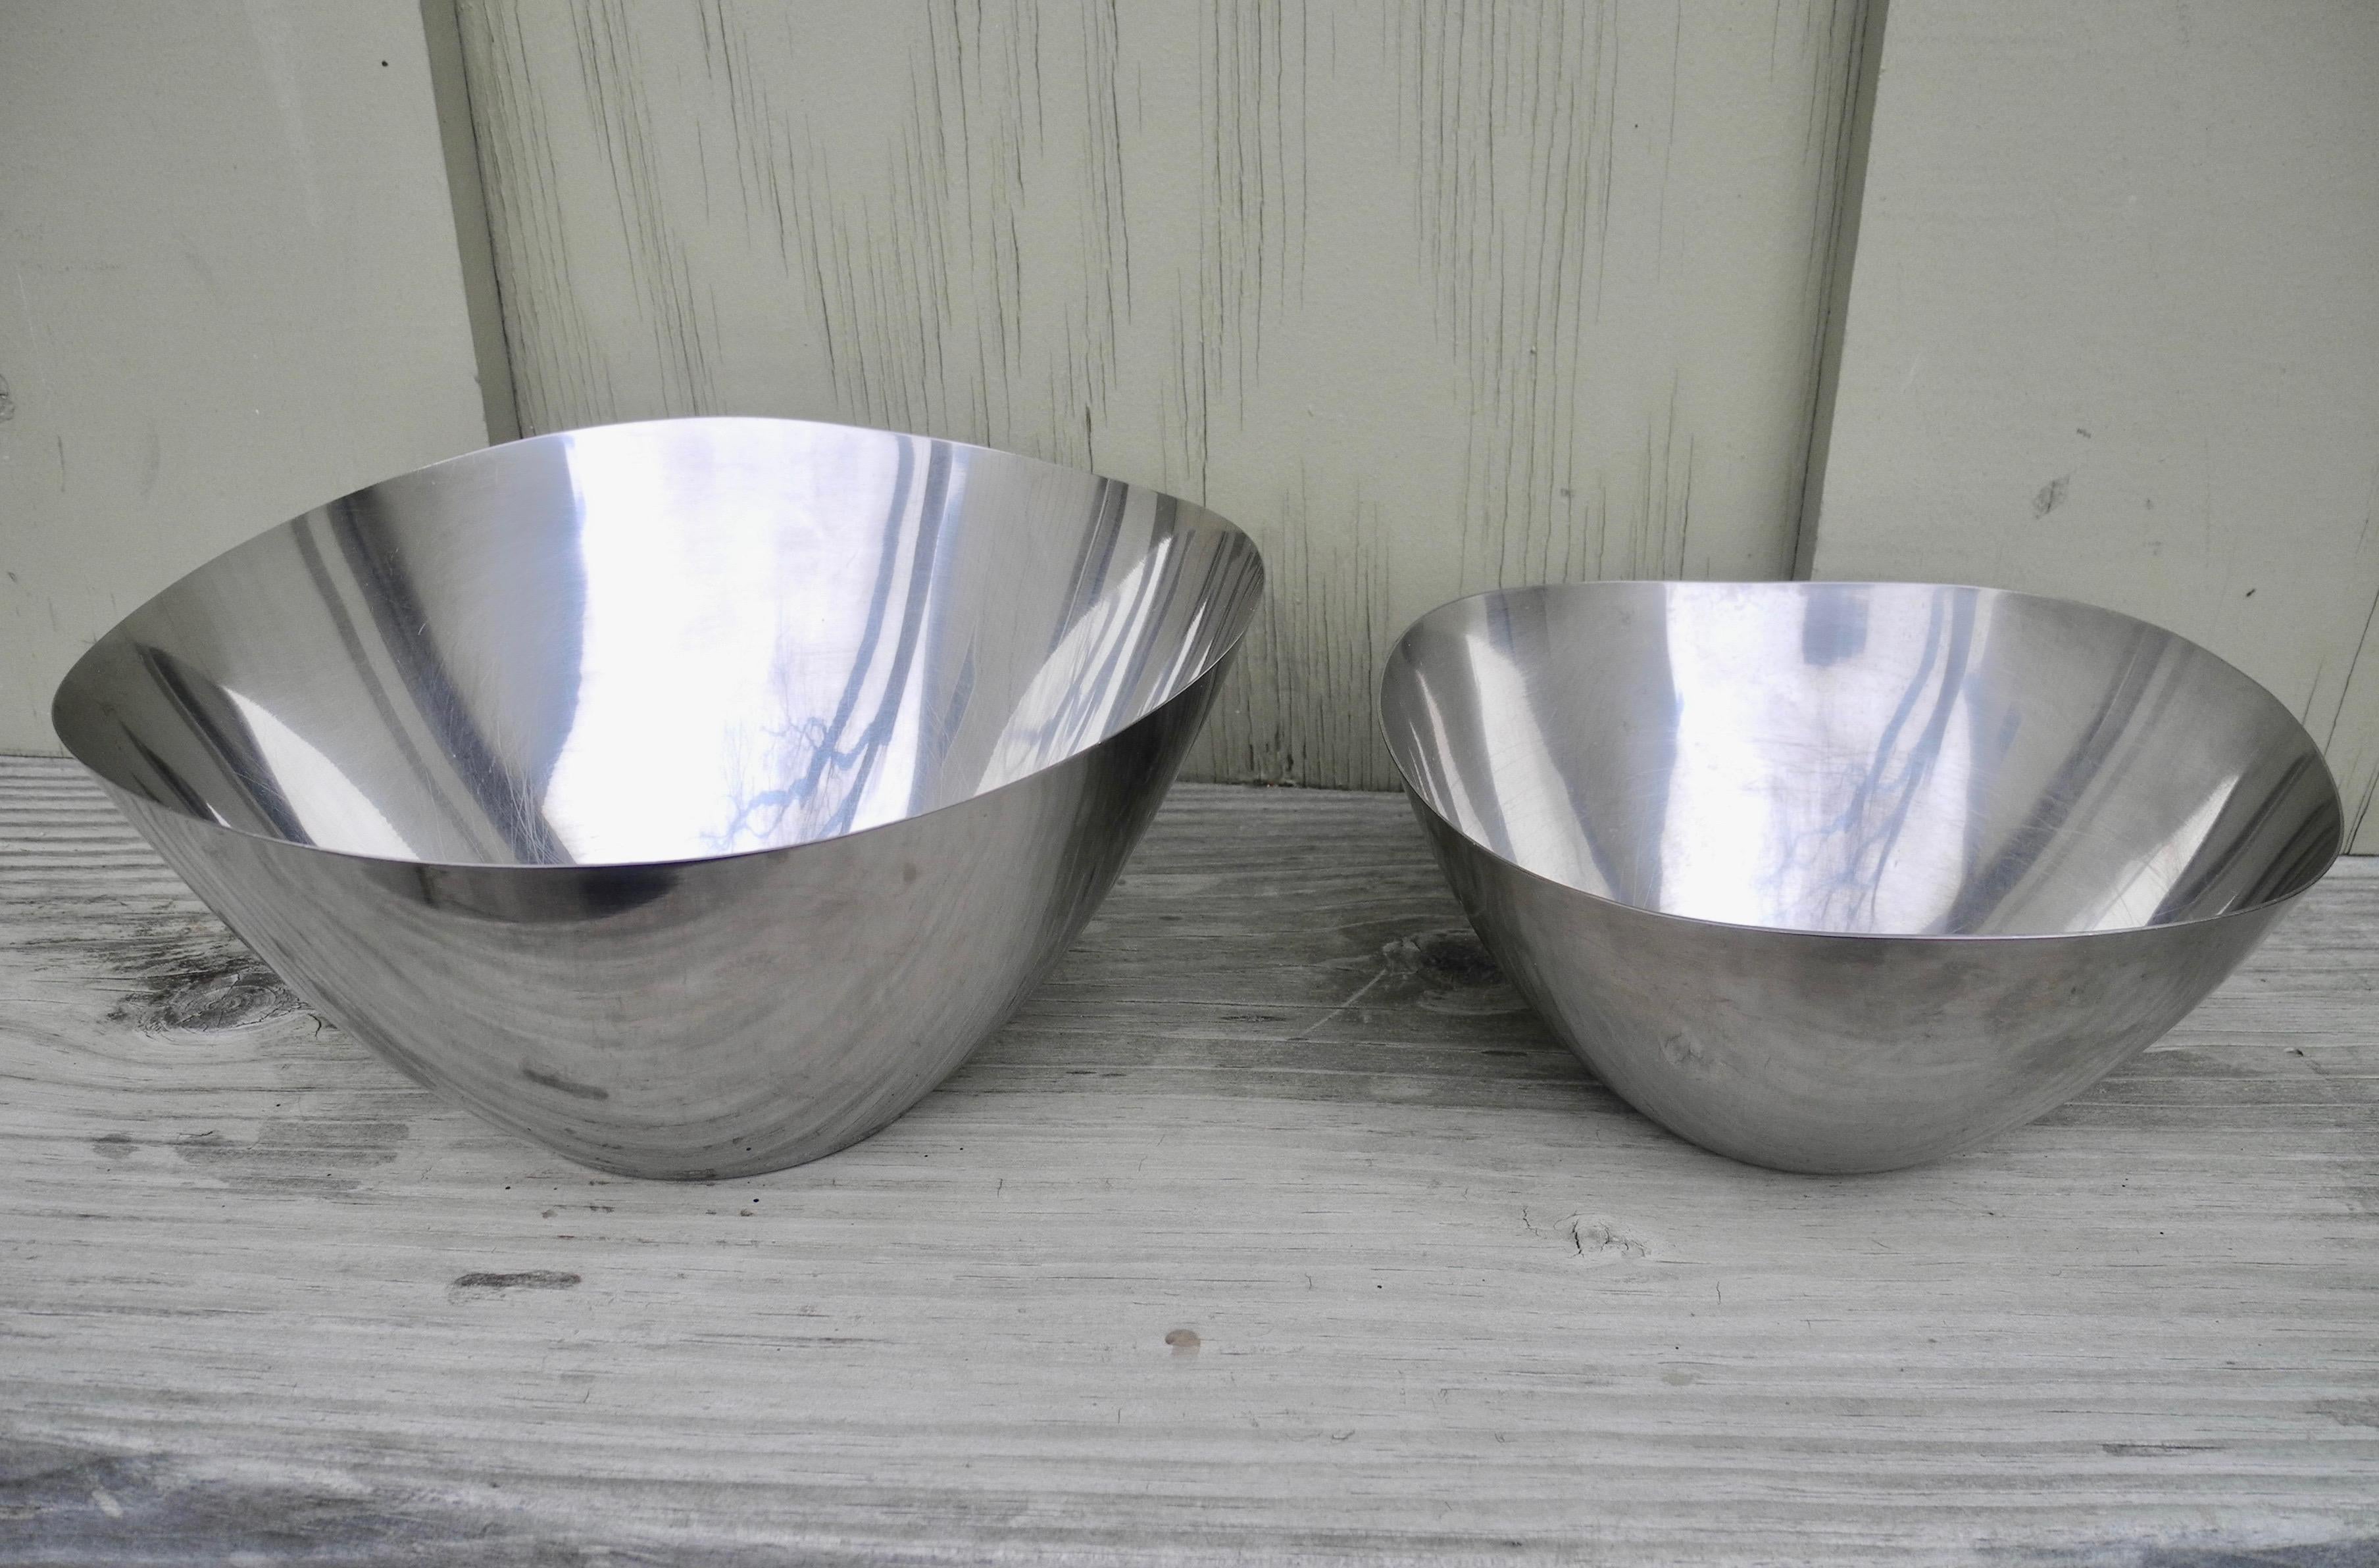 Pair of Vintage Stelton Stainless Steel Modern Design Sculptural Bowls, Denmark In Good Condition For Sale In Hudson, NY